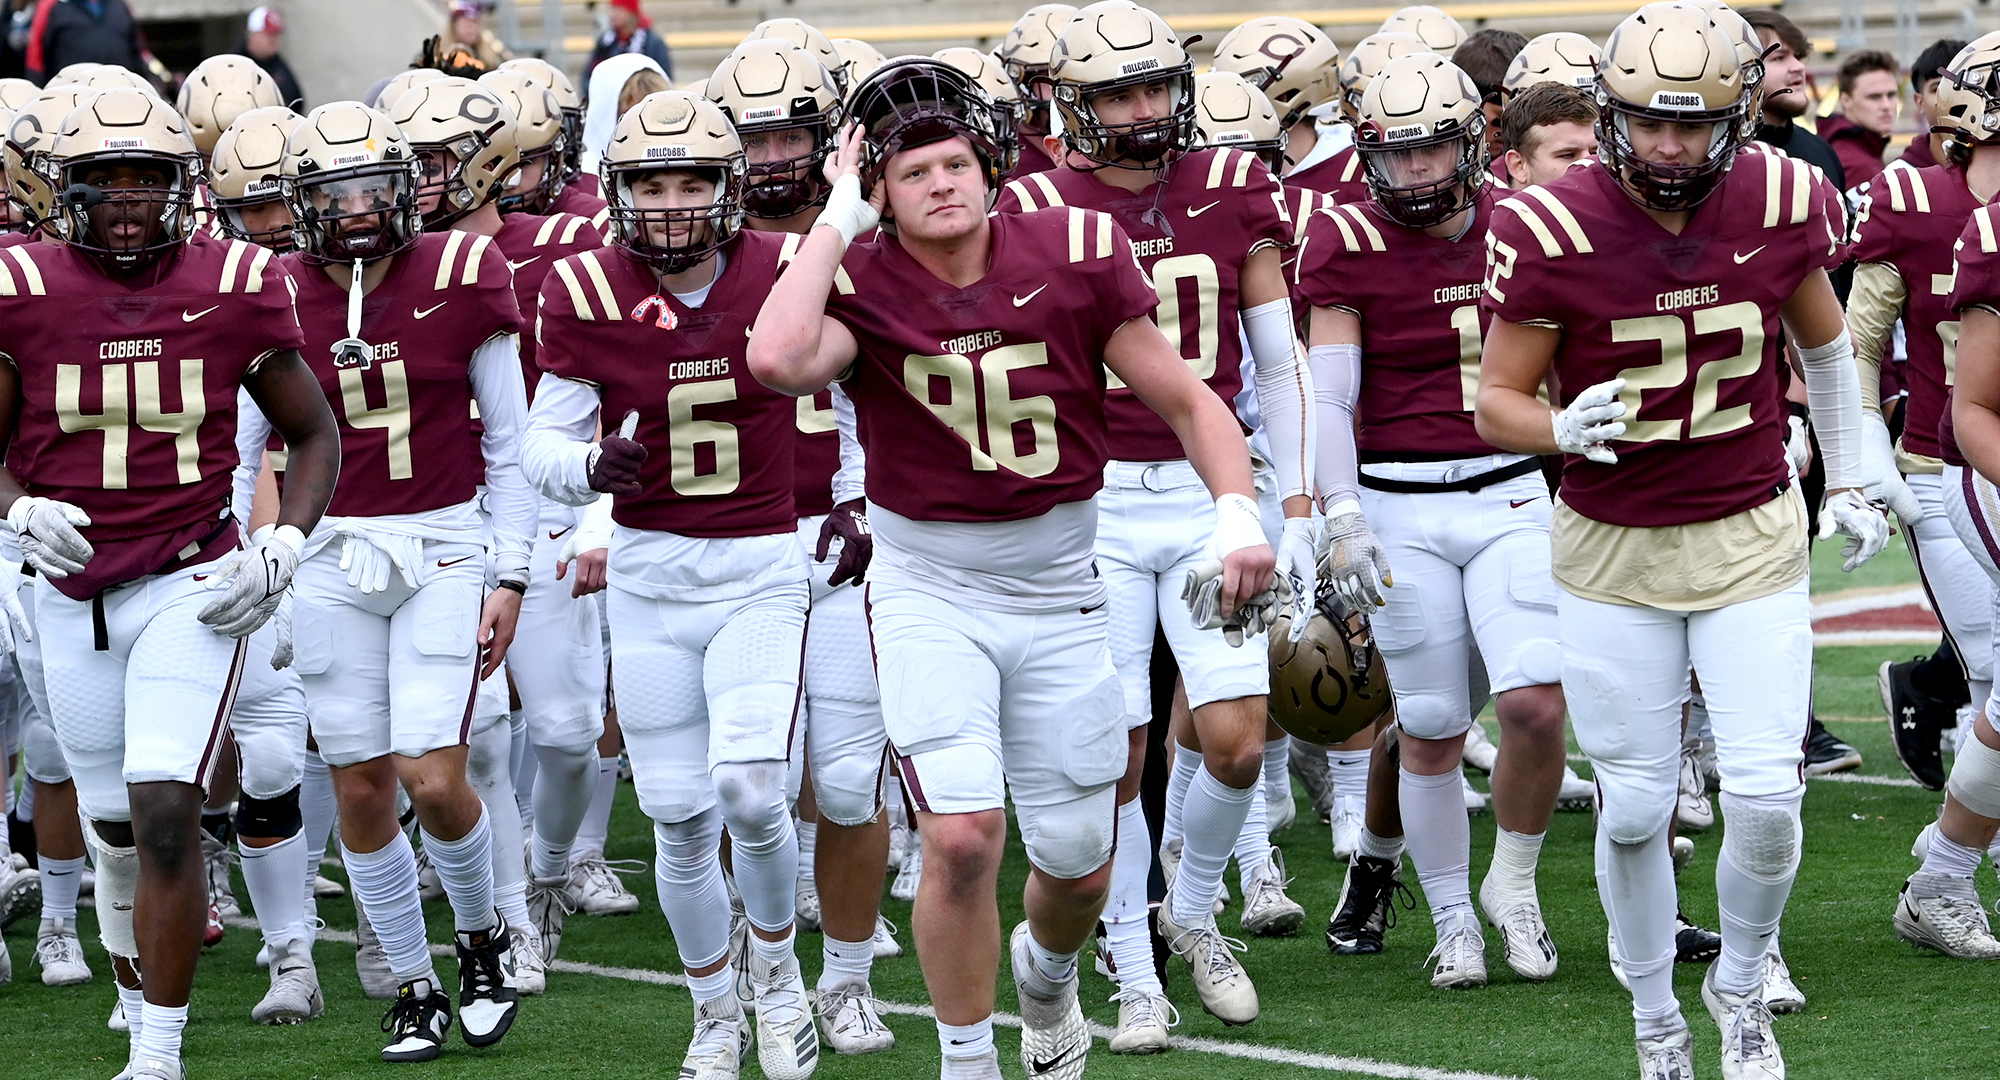 Mason Swanson (#96) was one of the of leaders of the Cobber defense which held Augsburg to a season-low offensive output.